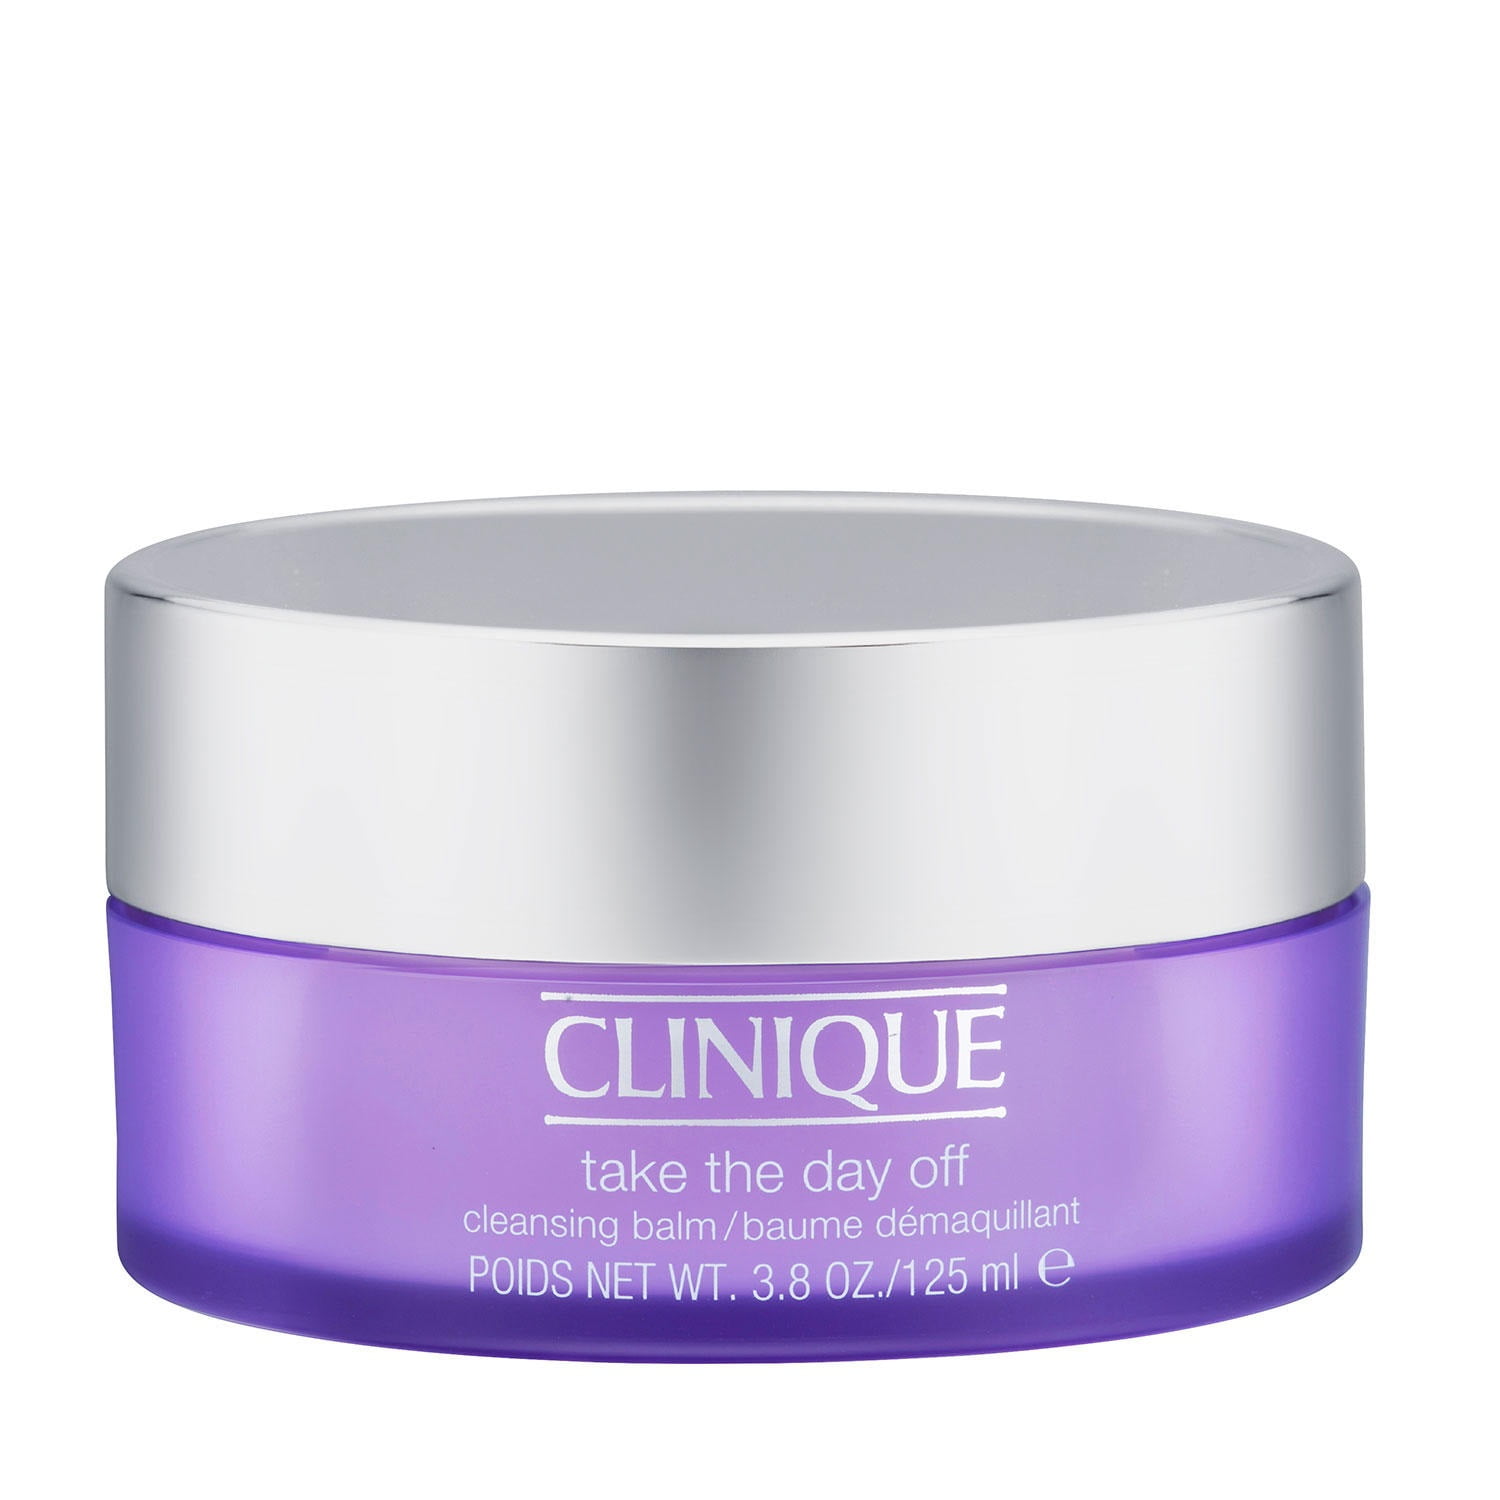 Clinique Take Balm, oz The Cleansing Day 3.8 Off